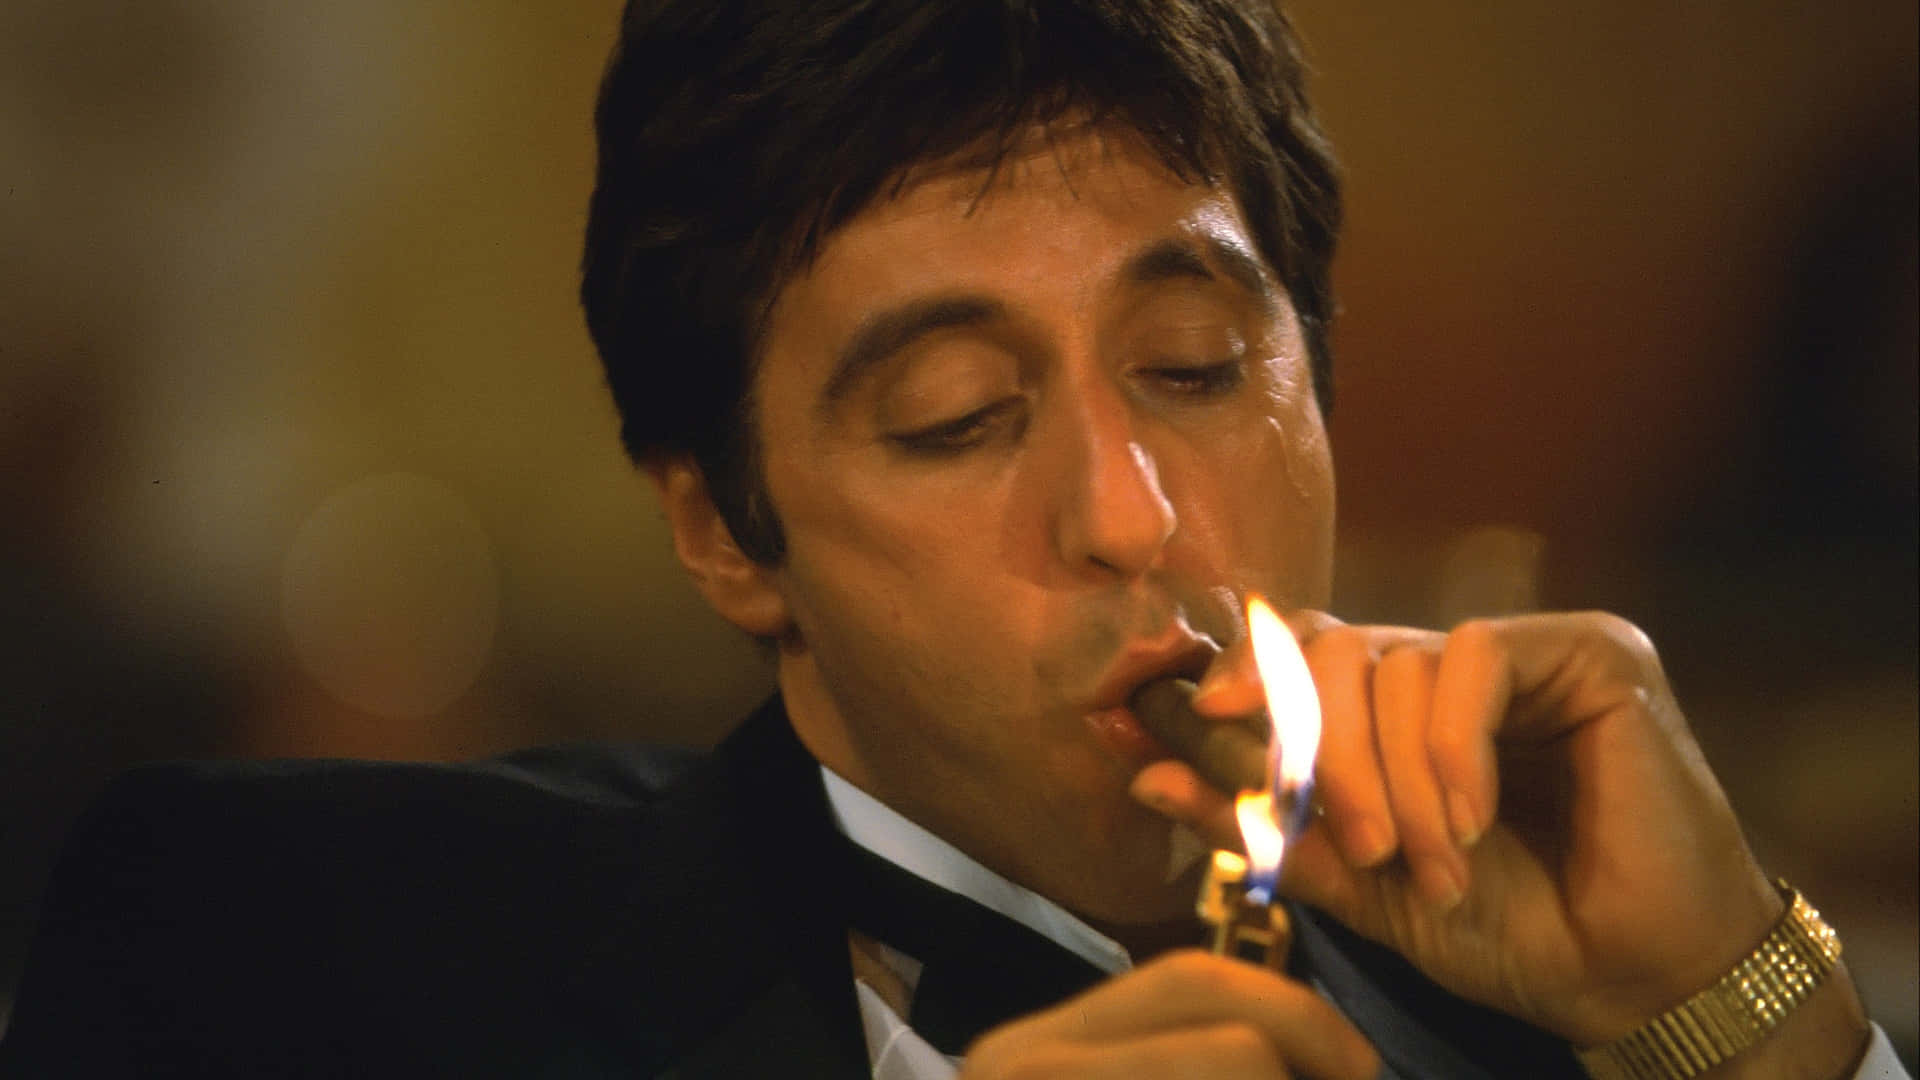 Image  Actor Al Pacino in The Godfather